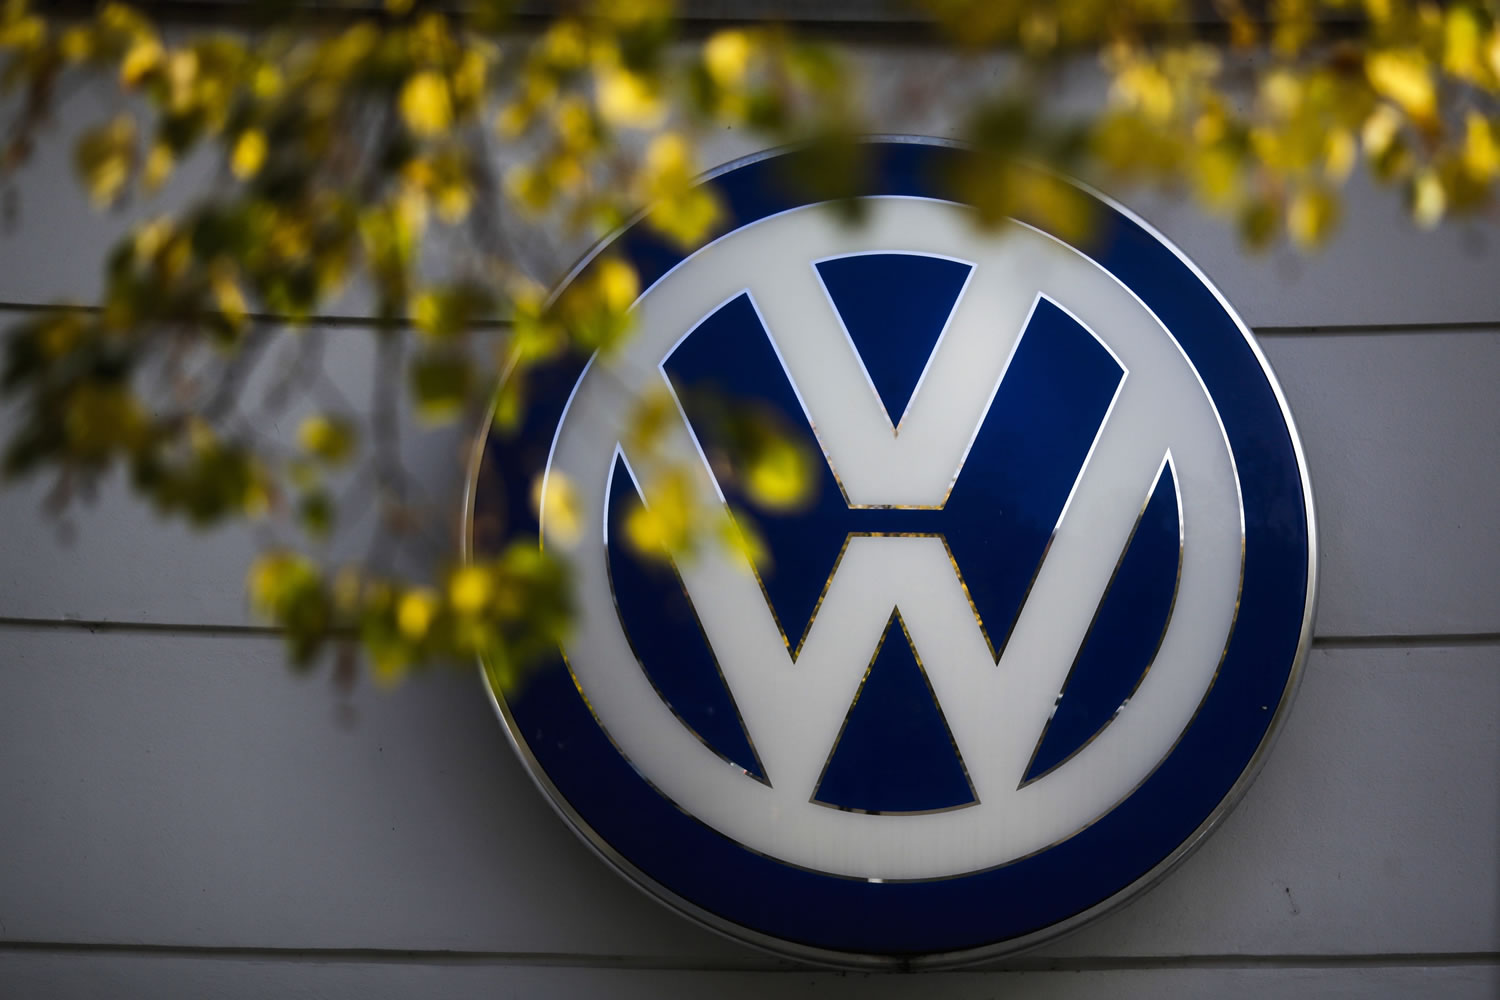 Volkswagen admitted in September that it intentionally defeated emissions testing.